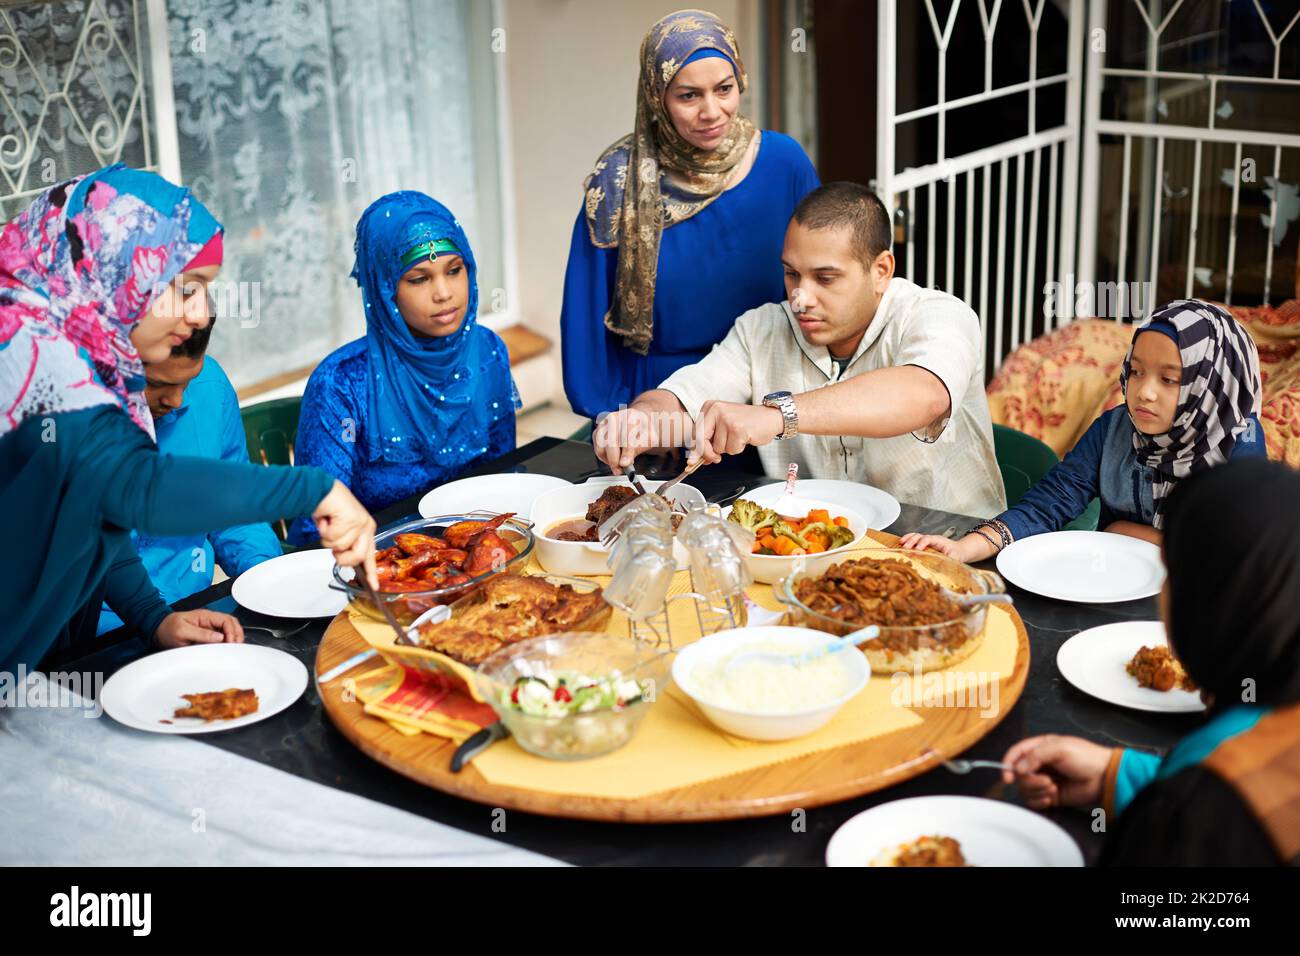 Dig in everyone. Shot of a muslim family eating together. Stock Photo